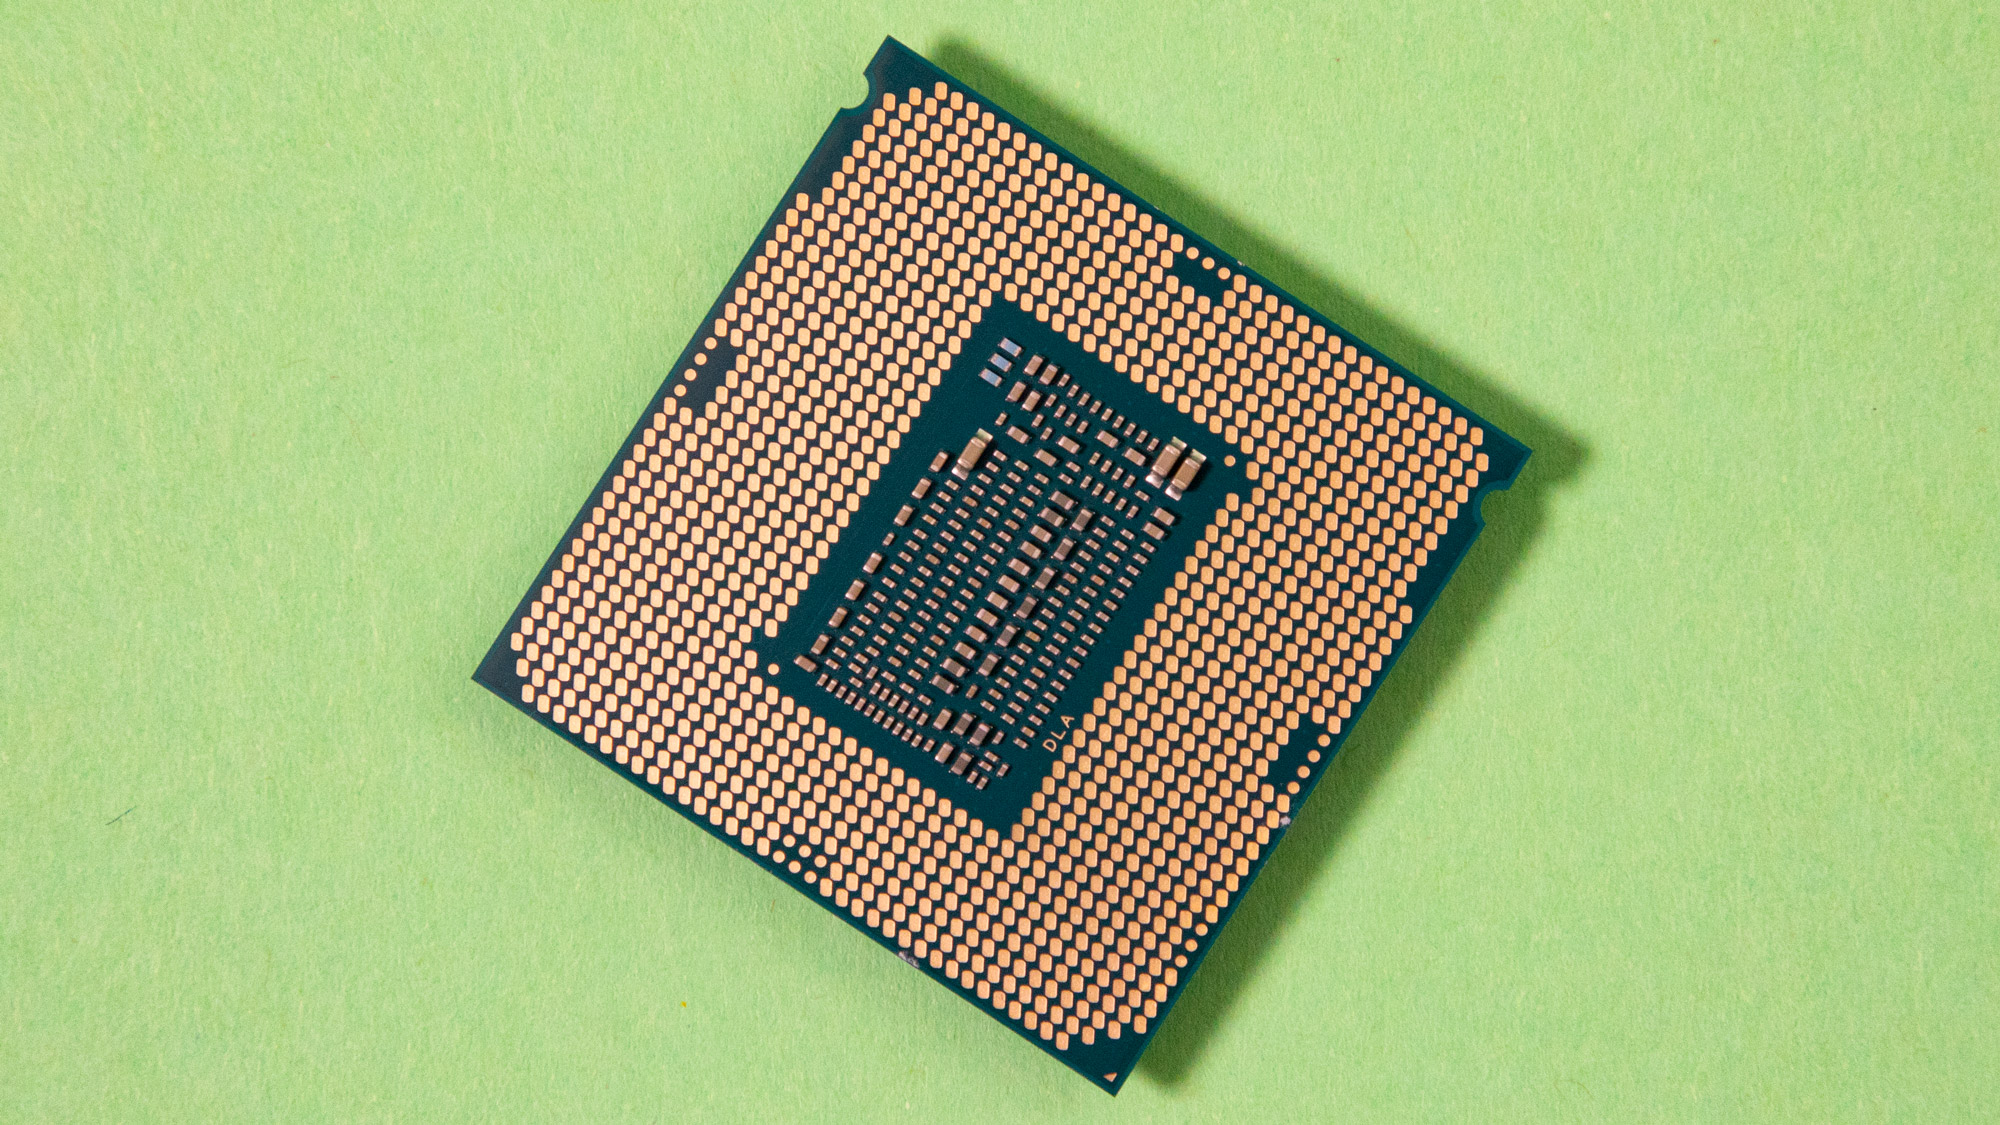 Intel S Latest Core I5 Cpu Could Rival Its Older And More Expensive Core I7 When It Comes To Gaming Techradar